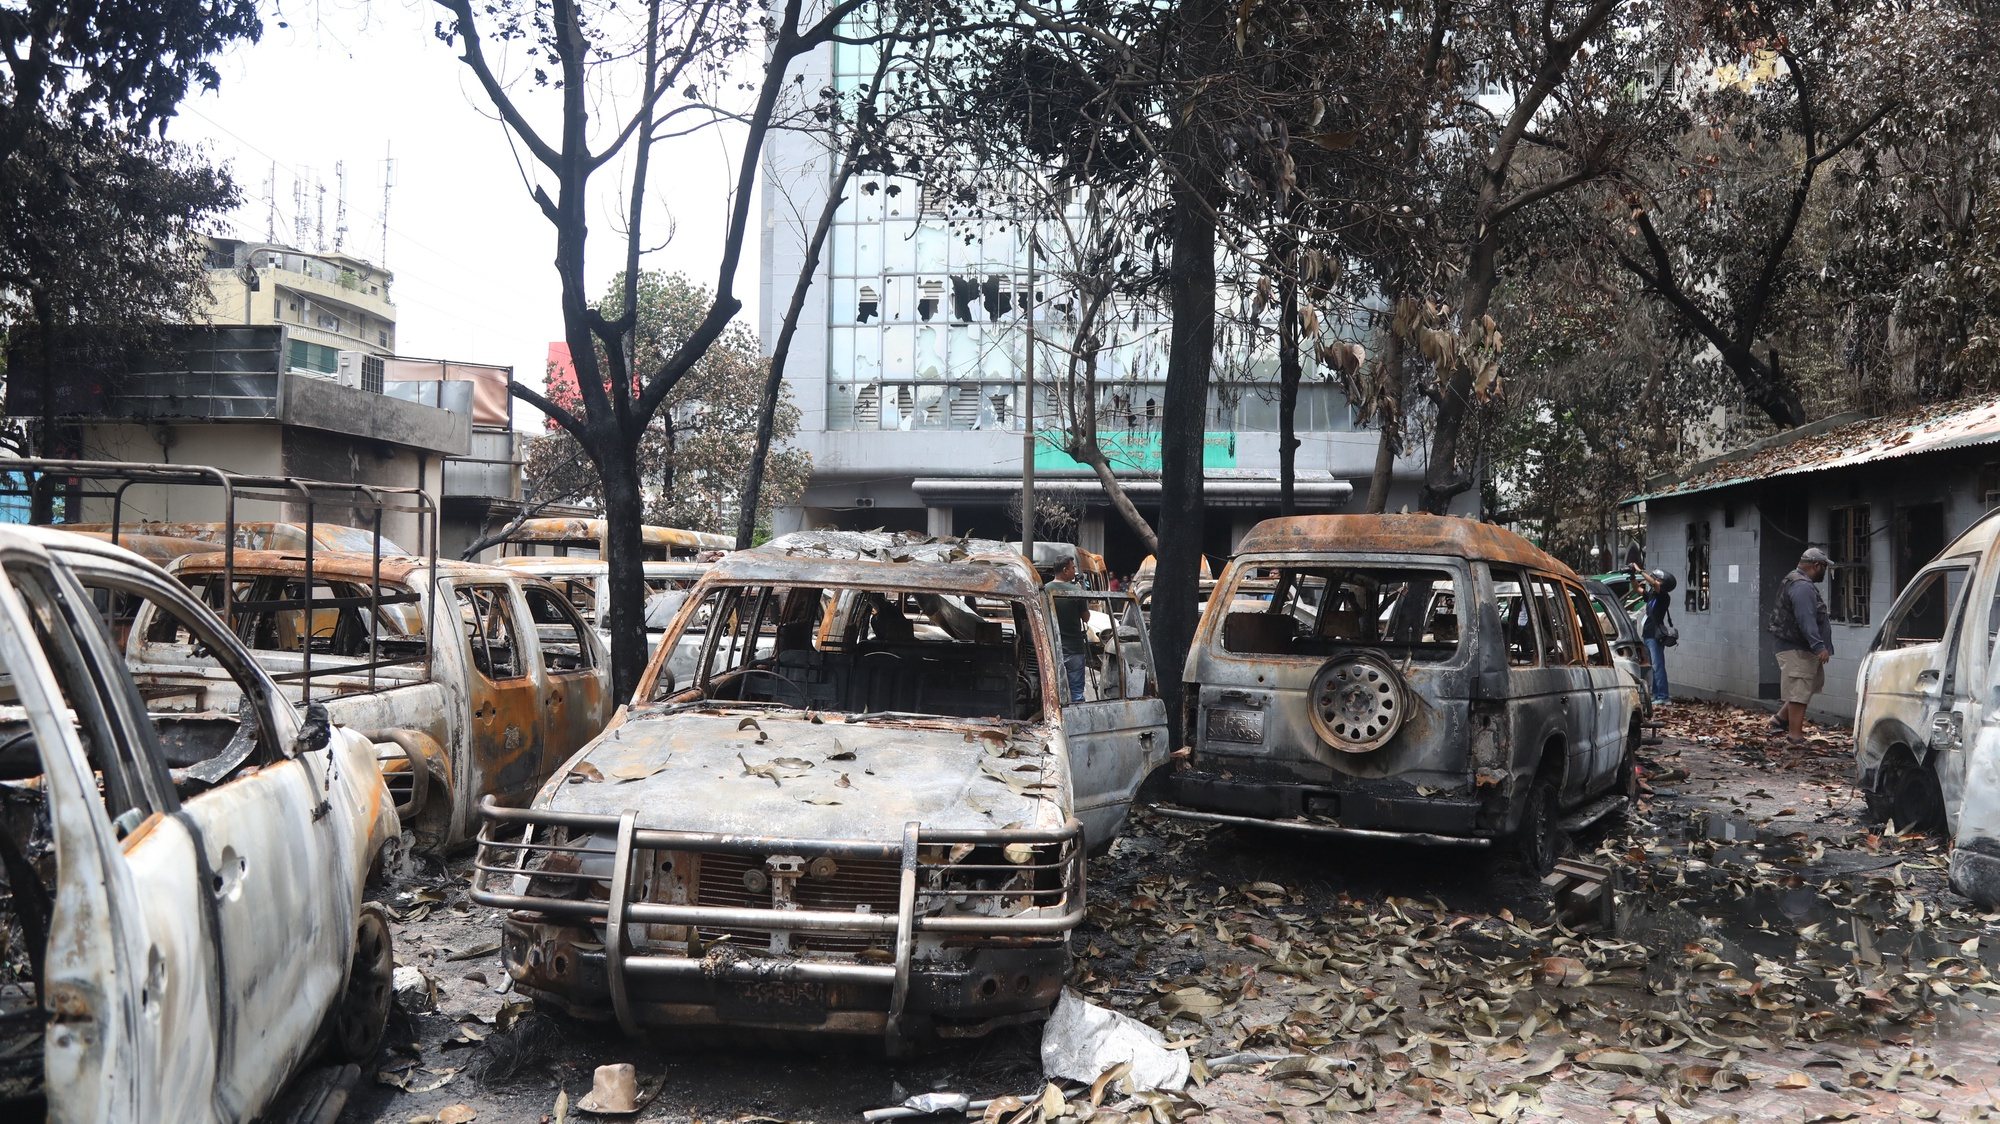 epa11491083 Burnt vehicles are seen outside a government building after protests in Dhaka, Bangladesh, 22 July 2024. On 22 July Bangladesh was under curfew; widespread disruption of telecoms prevailed a day after the Bangladesh Supreme Court scrapped some quotas for government jobs that sparked protests, and police were authorized to enforce &#039;shoot on sight&#039; orders across the country during curfew as casualties mounted and law enforcement struggled to contain the unrest. The Bangladeshi government imposed a nationwide curfew and deployed military forces after violence broke out in Dhaka and other regions following student-led protests demanding reforms to the government&#039;s job quota system.  EPA/MONIRUL ALAM